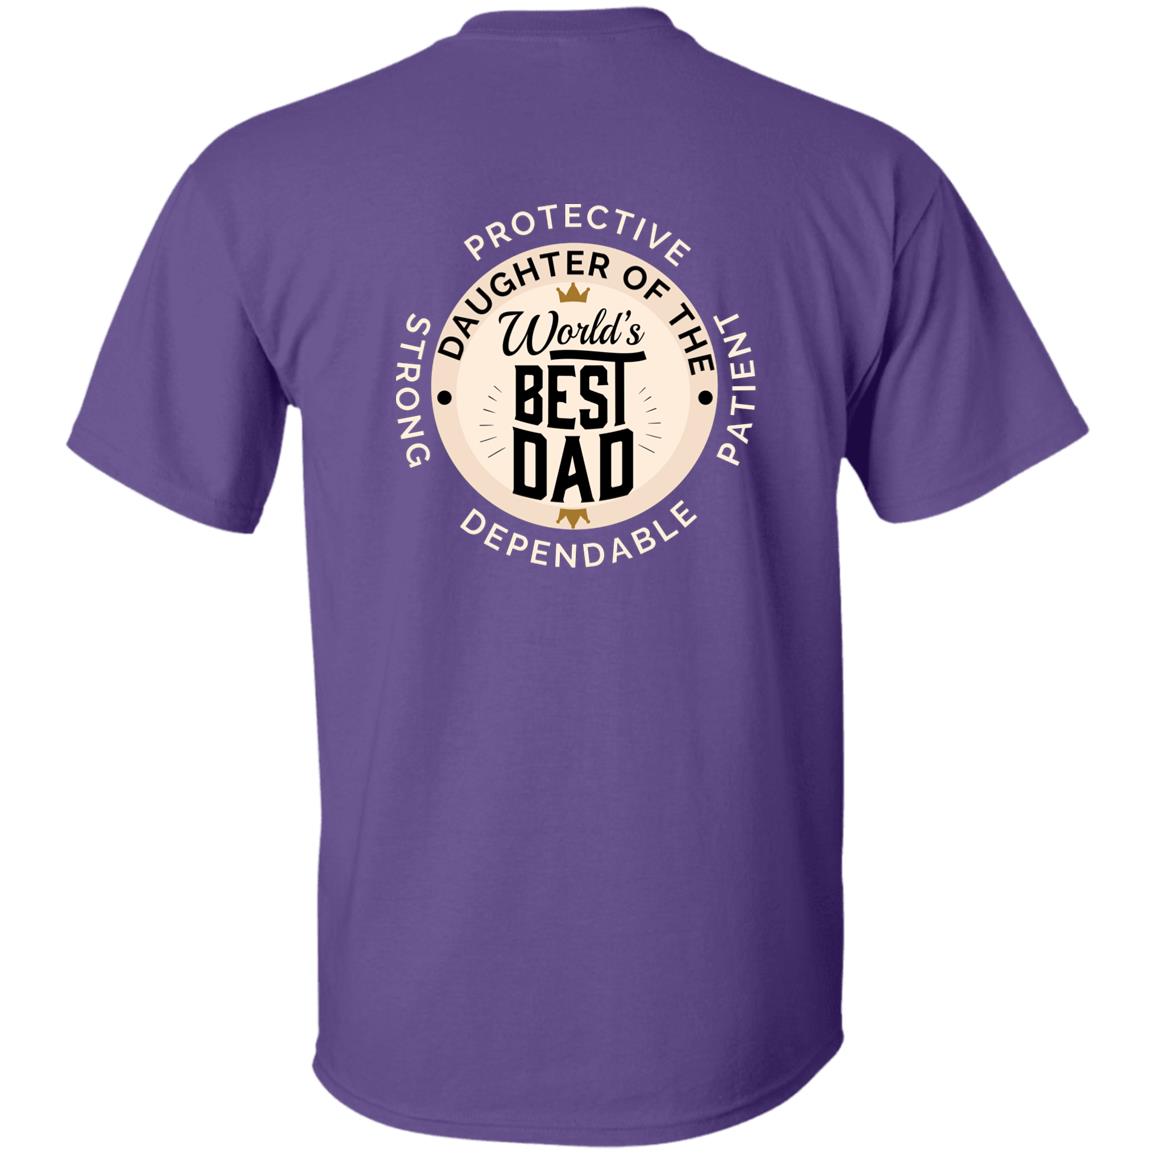 Daughter of World's Best Dad Crown Youth Apparel